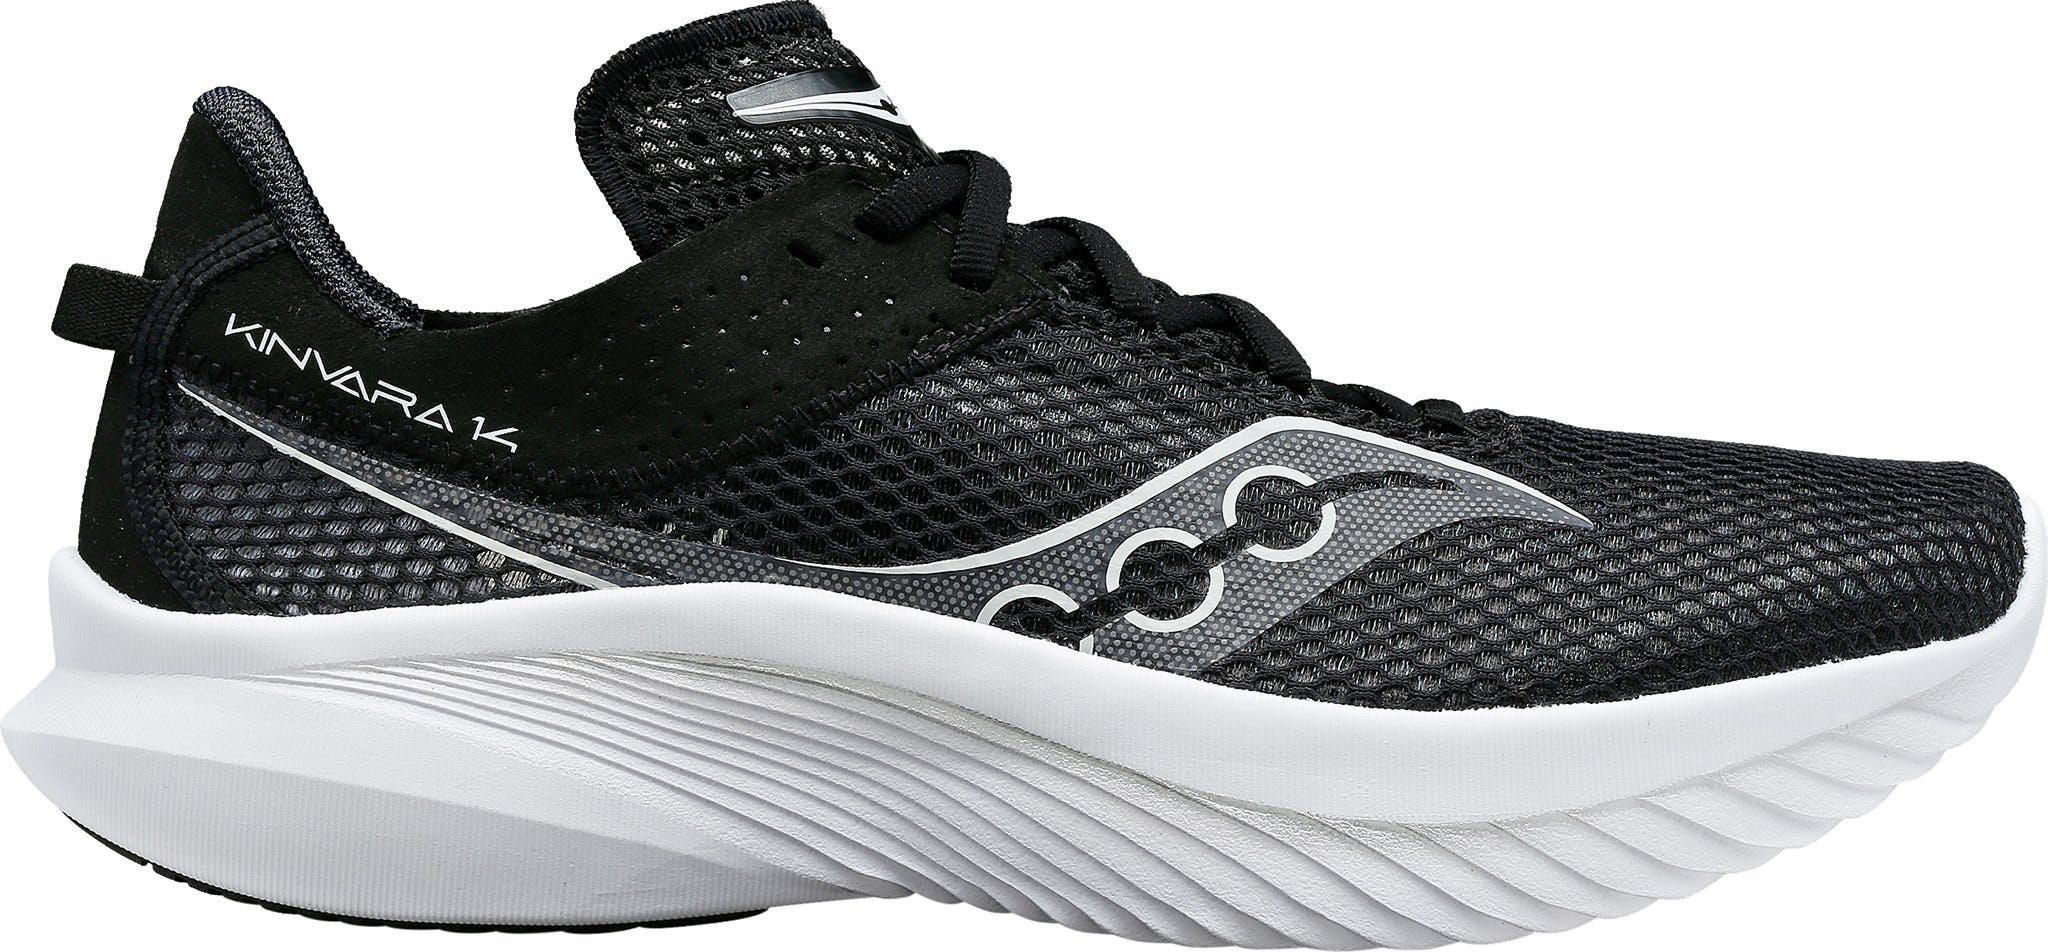 Product image for Kinvara 14 Road Running Shoes - Men's